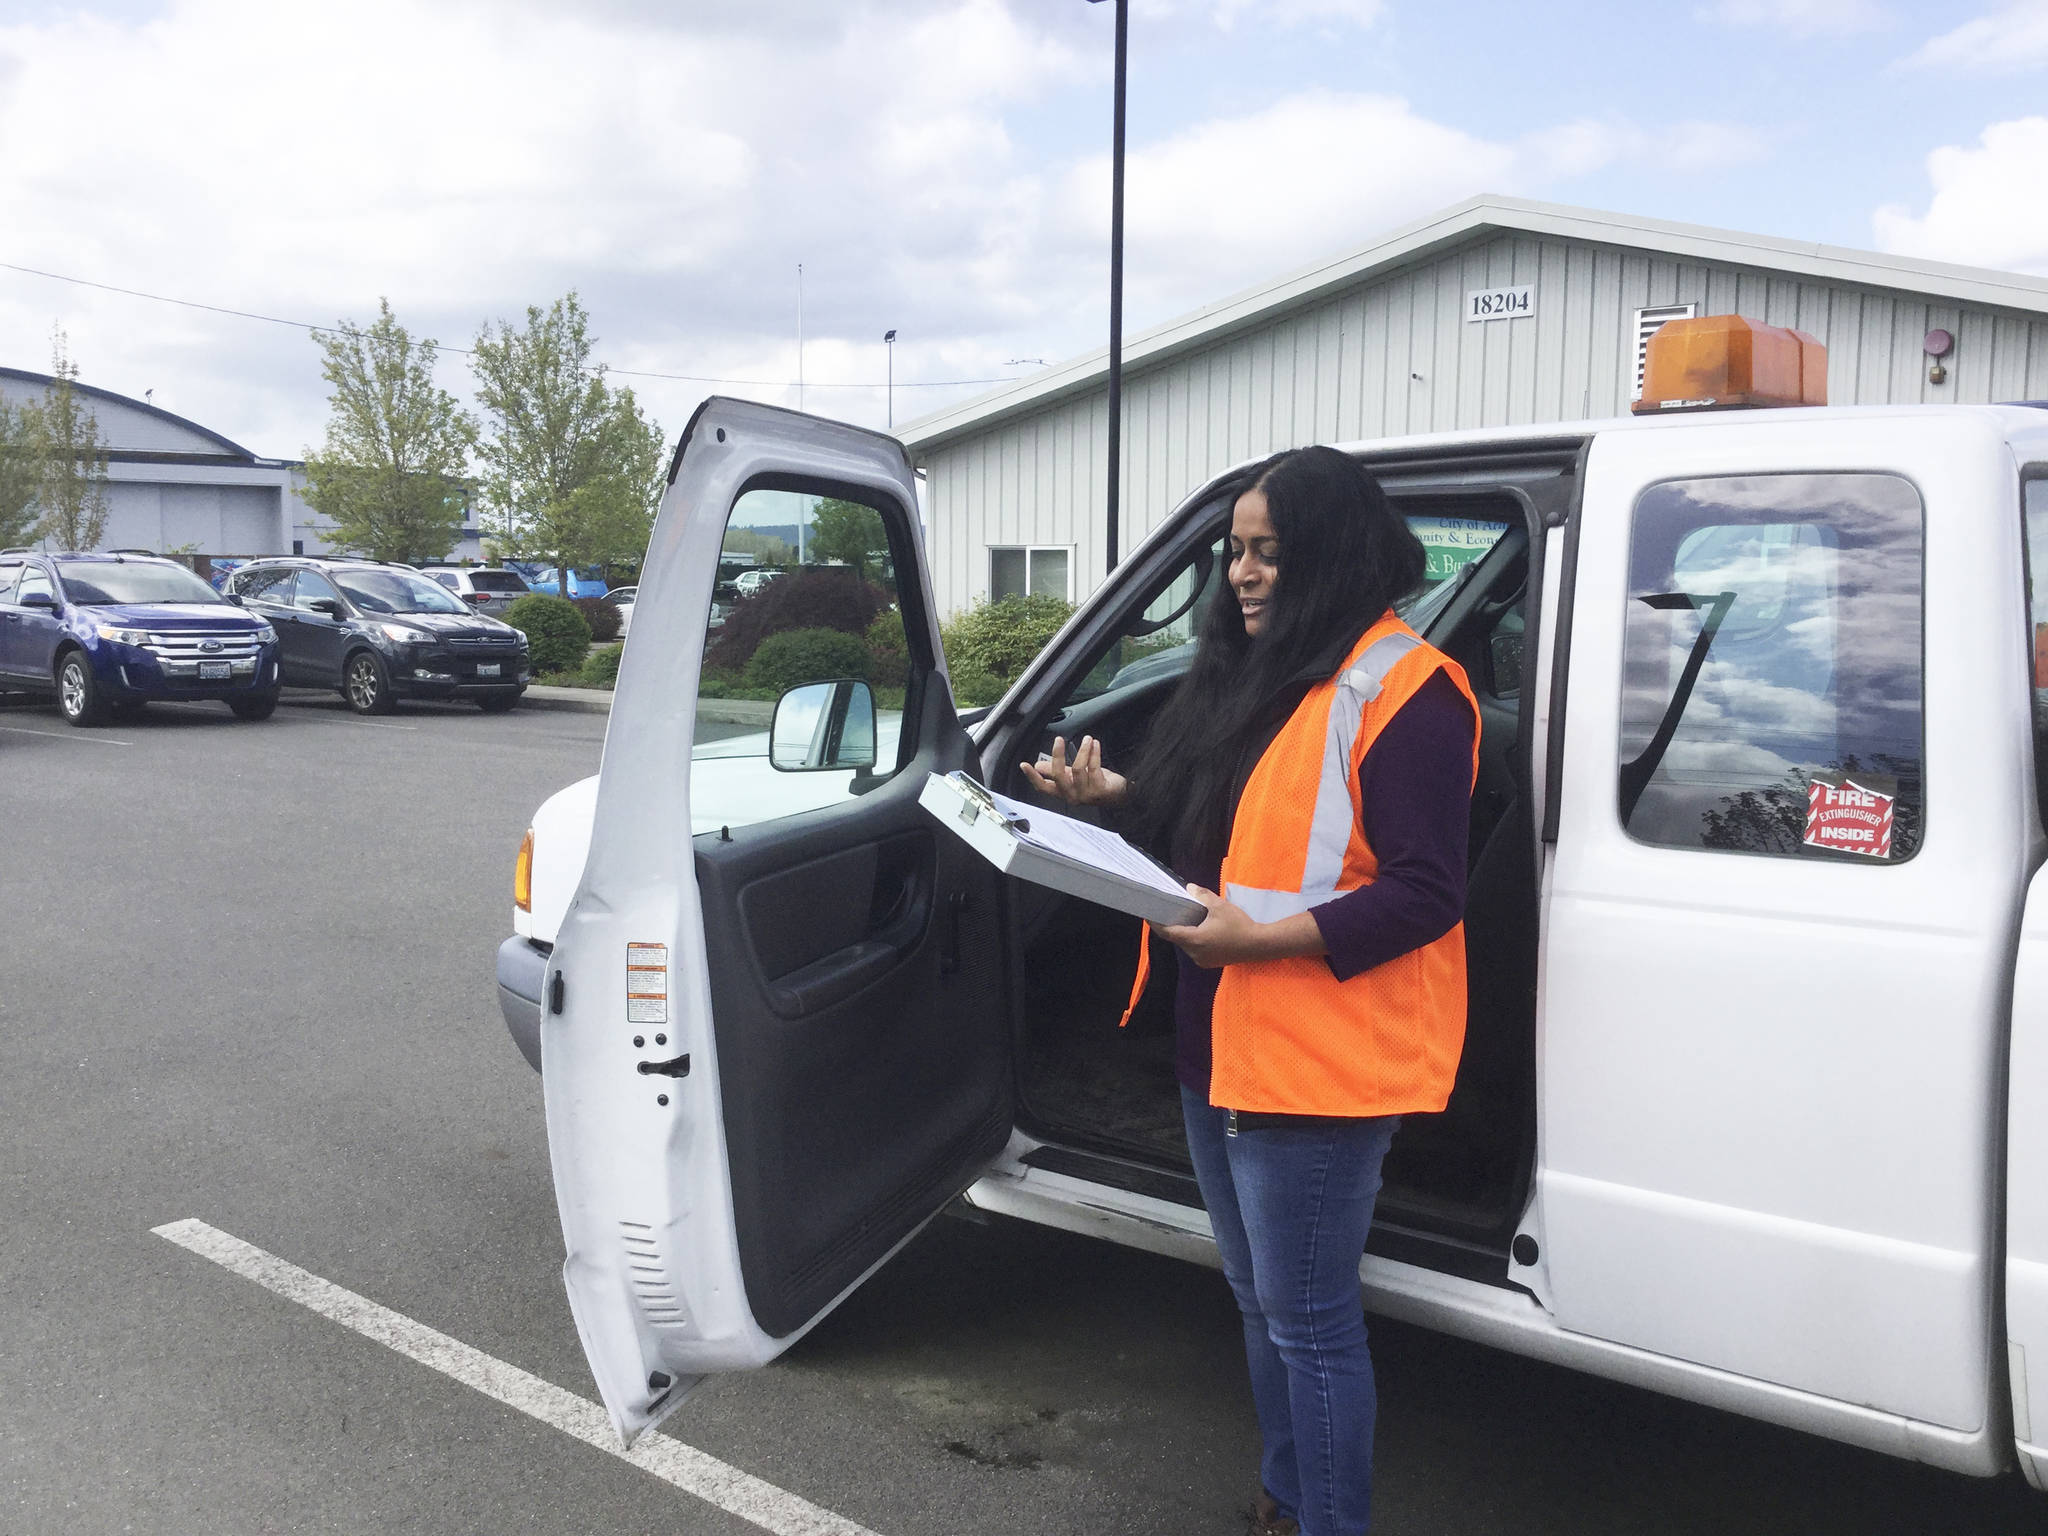 Nalini Margaitis was hired as the city of Arlington’s first full-time code compliance officer. She will follow up on complaints such as junk cars, yard rubbish and other eyesore code violations that give Arlington neighborhoods a black eye.